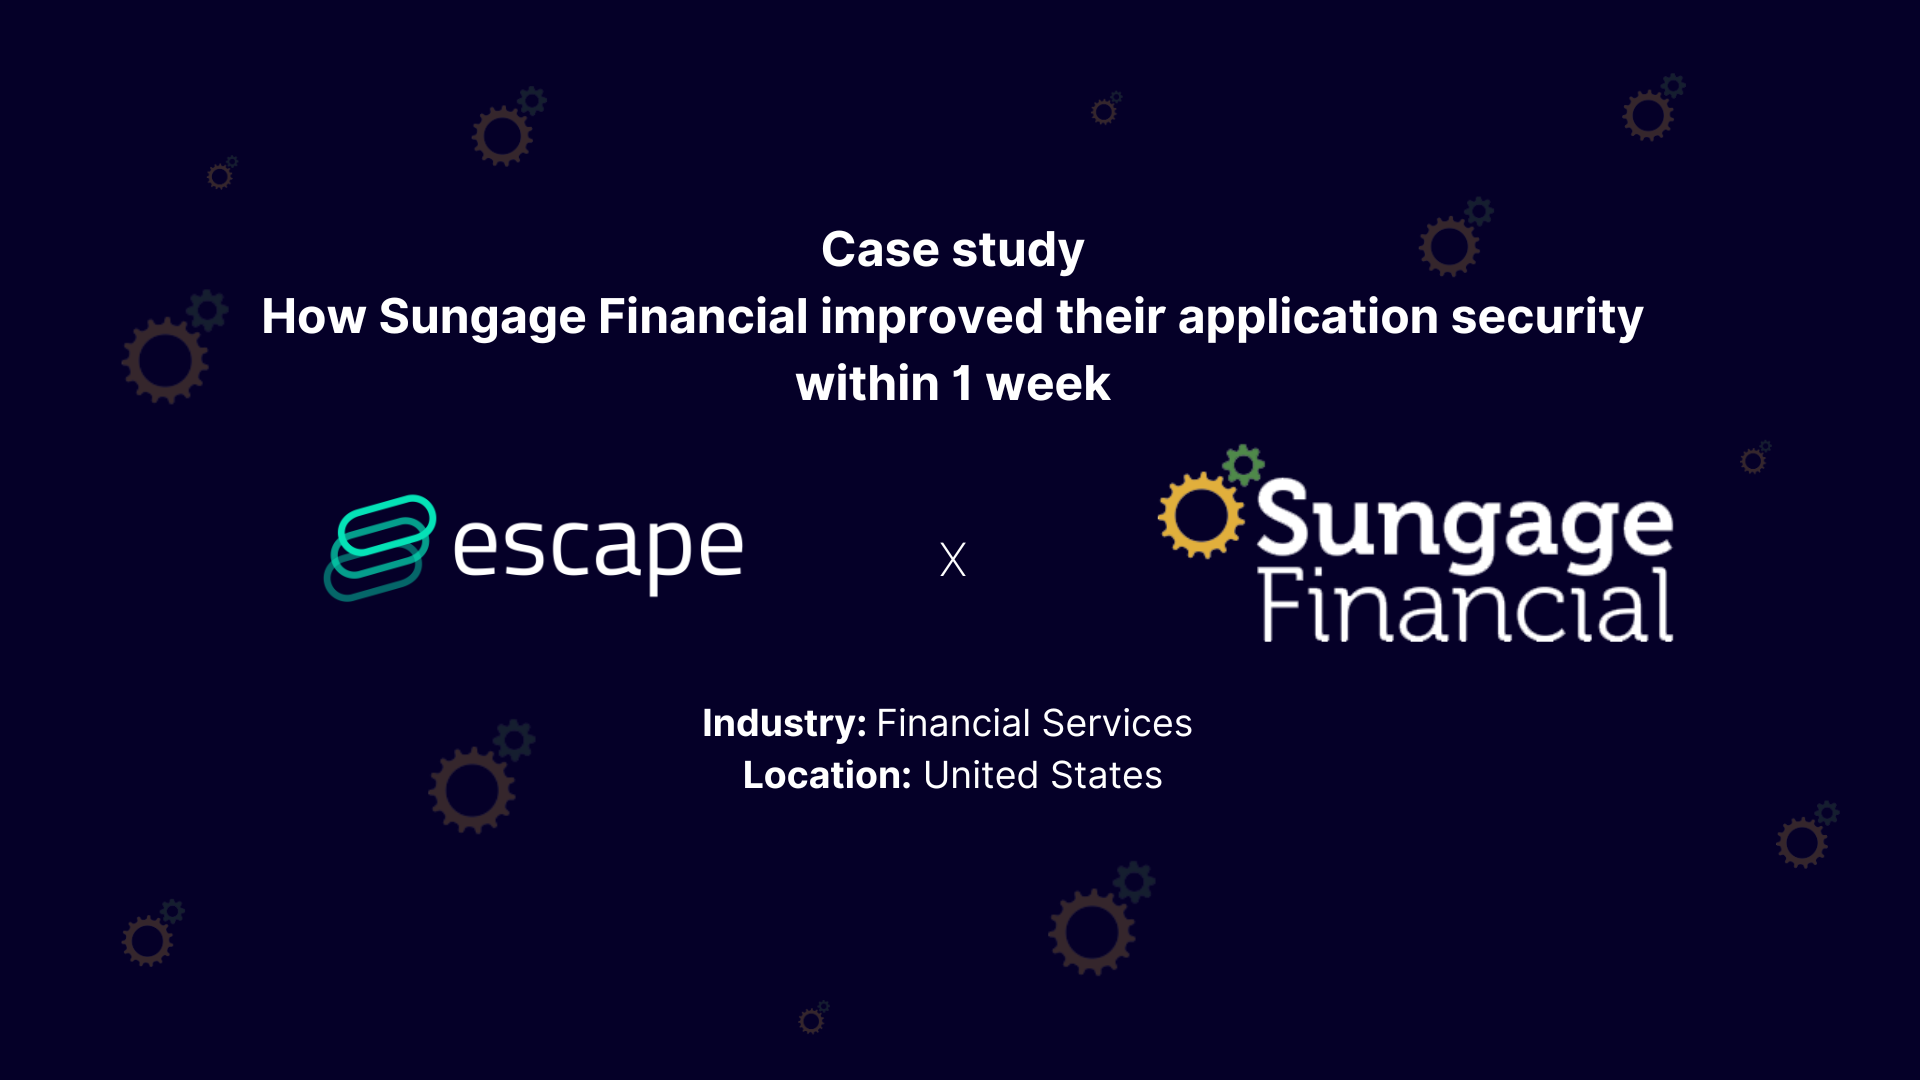 Case Study: How Sungage Financial improved their application security within 1 week